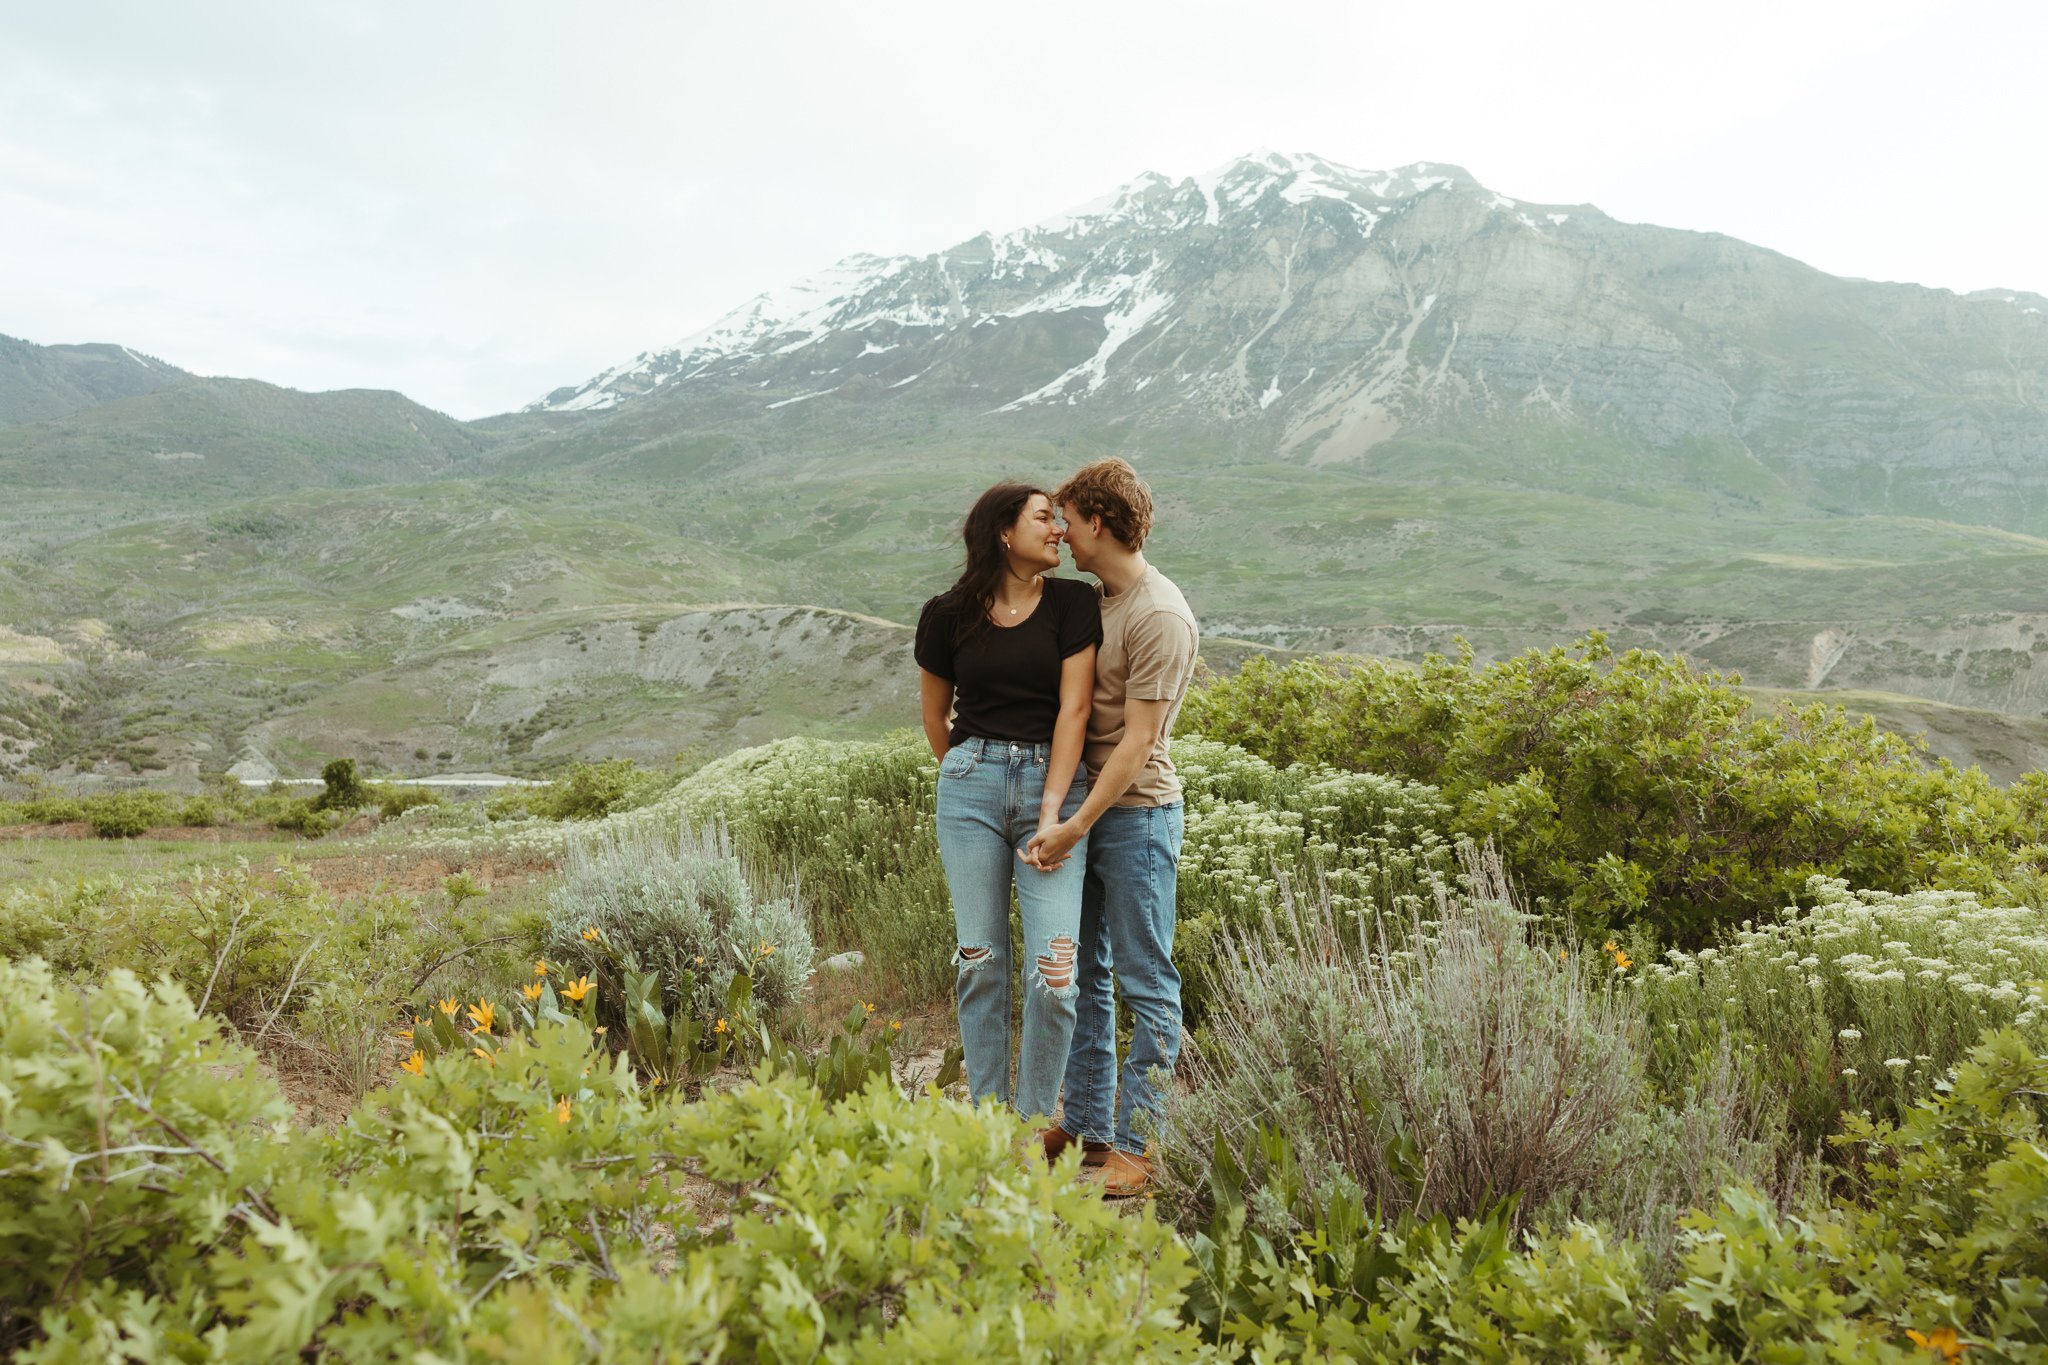 Spring-Provo-Canyon-Wildflowers-Engagement-Session-24